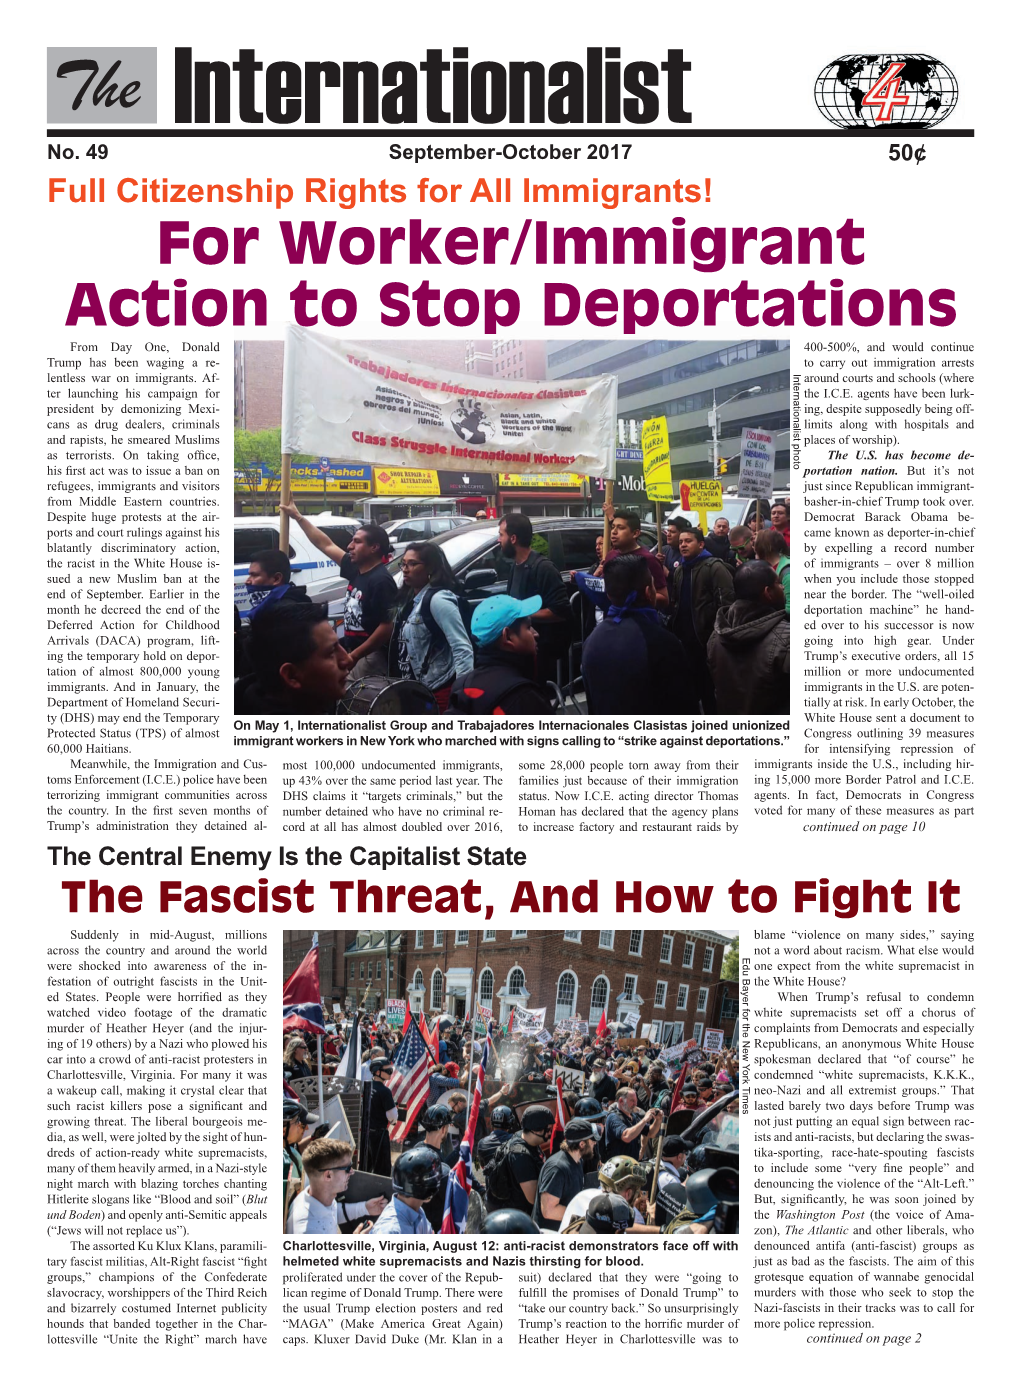 For Worker/Immigrant Action to Stop Deportations